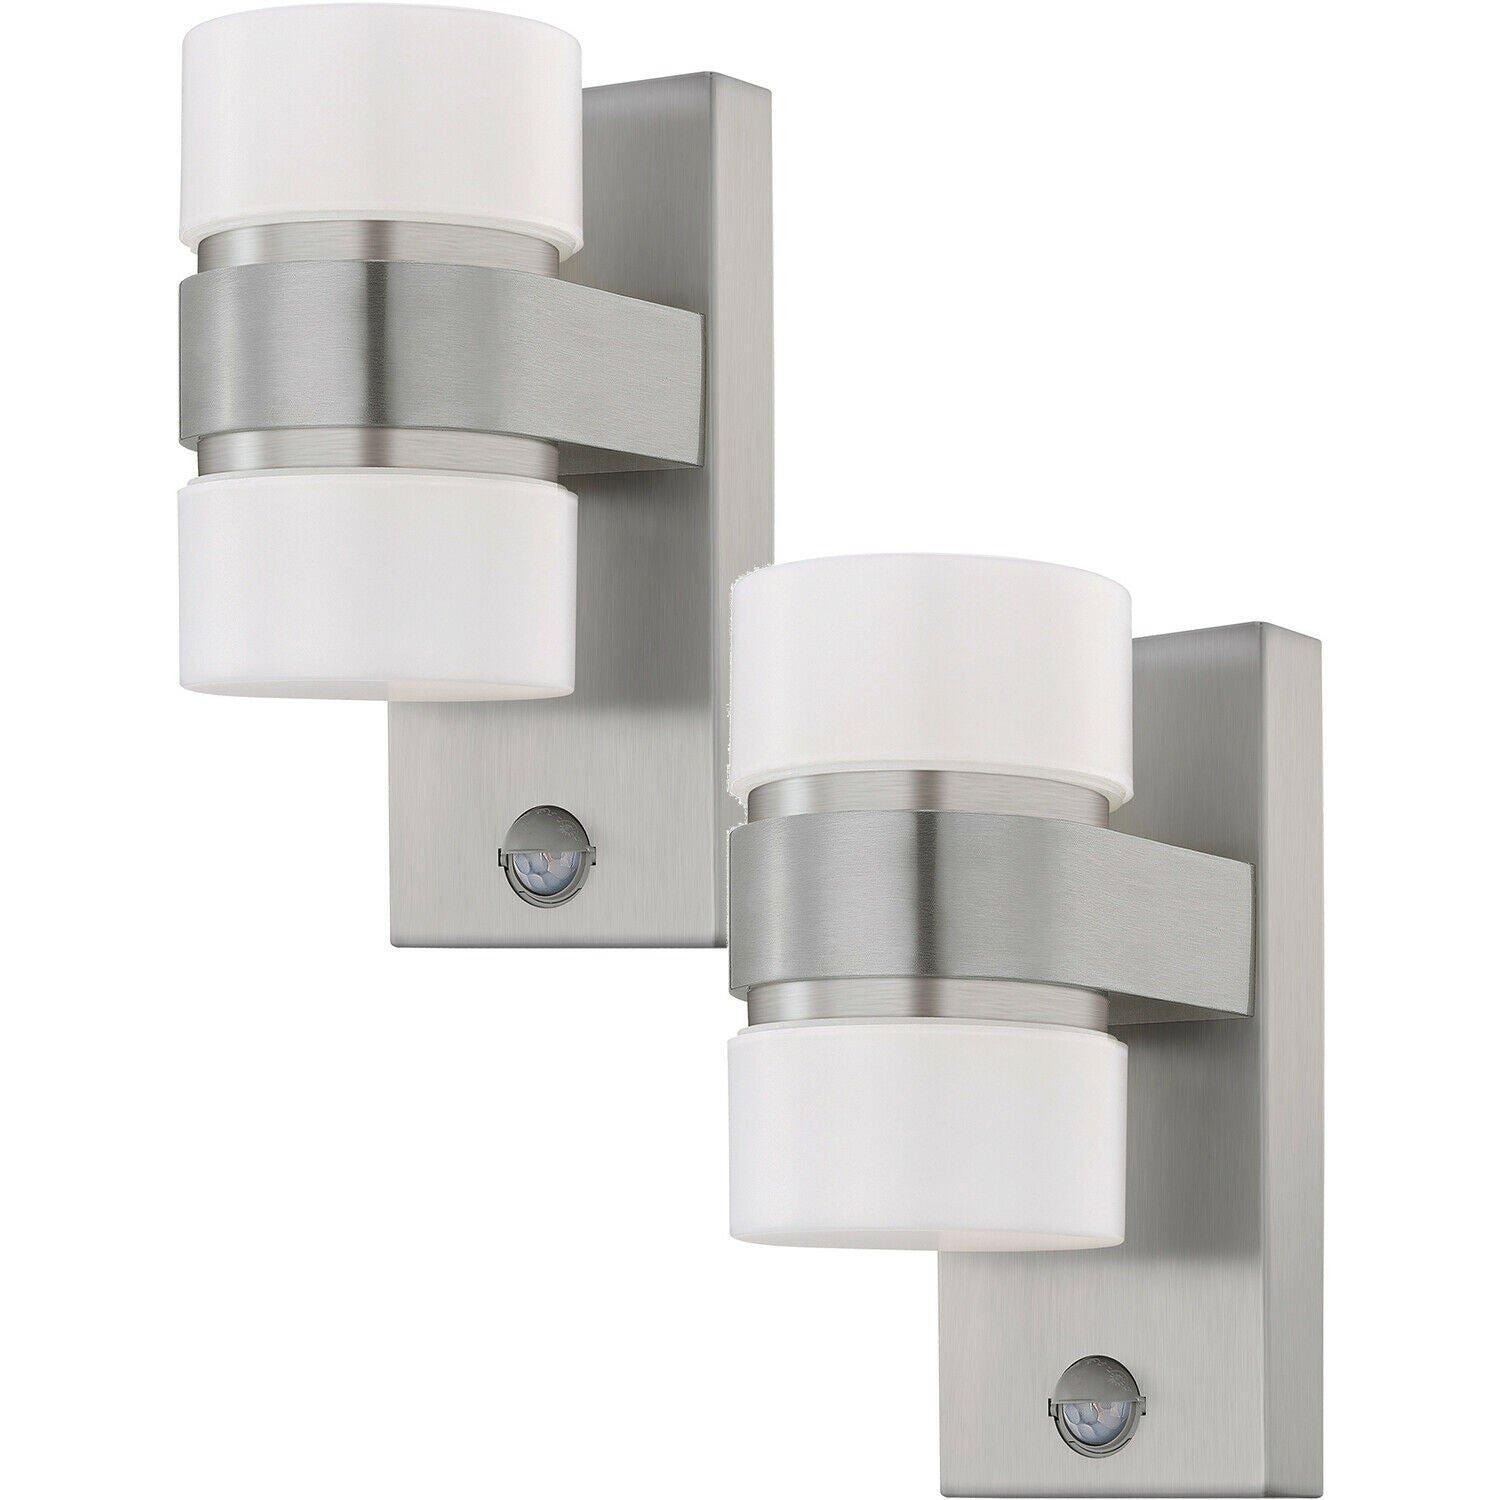 2 PACK IP44 Outdoor Wall Light & PIR Sensor Stainless Steel & Silver 6W LED - image 1